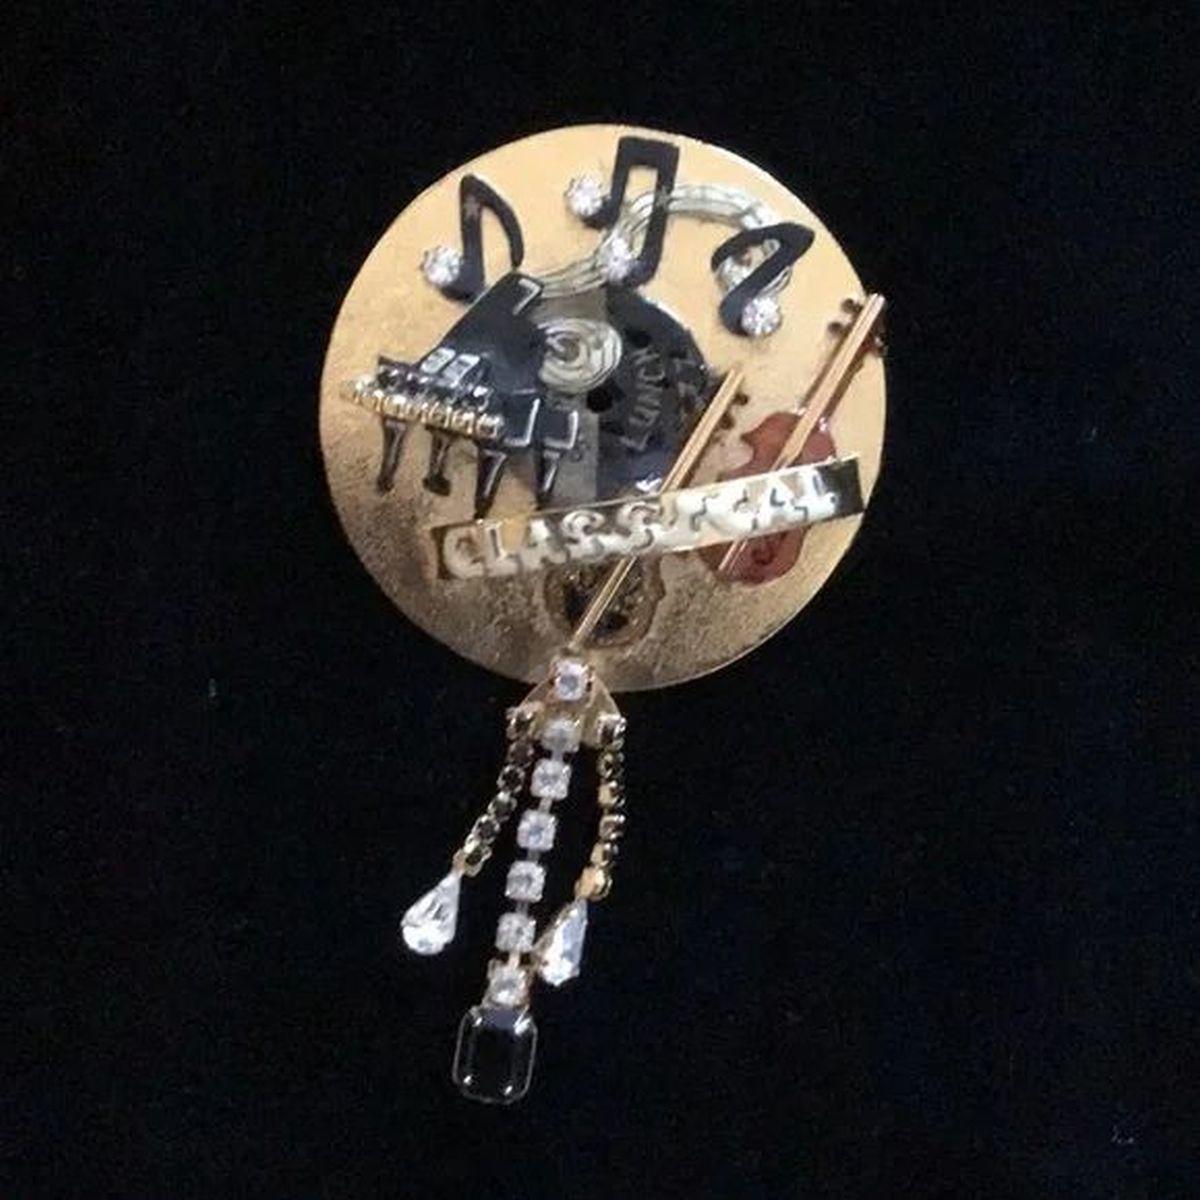 Awesome Vintage Enamel and Crystal Musical Themed Designer Brooch Pendant Signed: LUNCH AT THE RITZ. This “Classical Music Inspired” Brooch epitomizes Vintage charm with personality! Featuring Musical Notes, a Piano including a Violin and Bow,